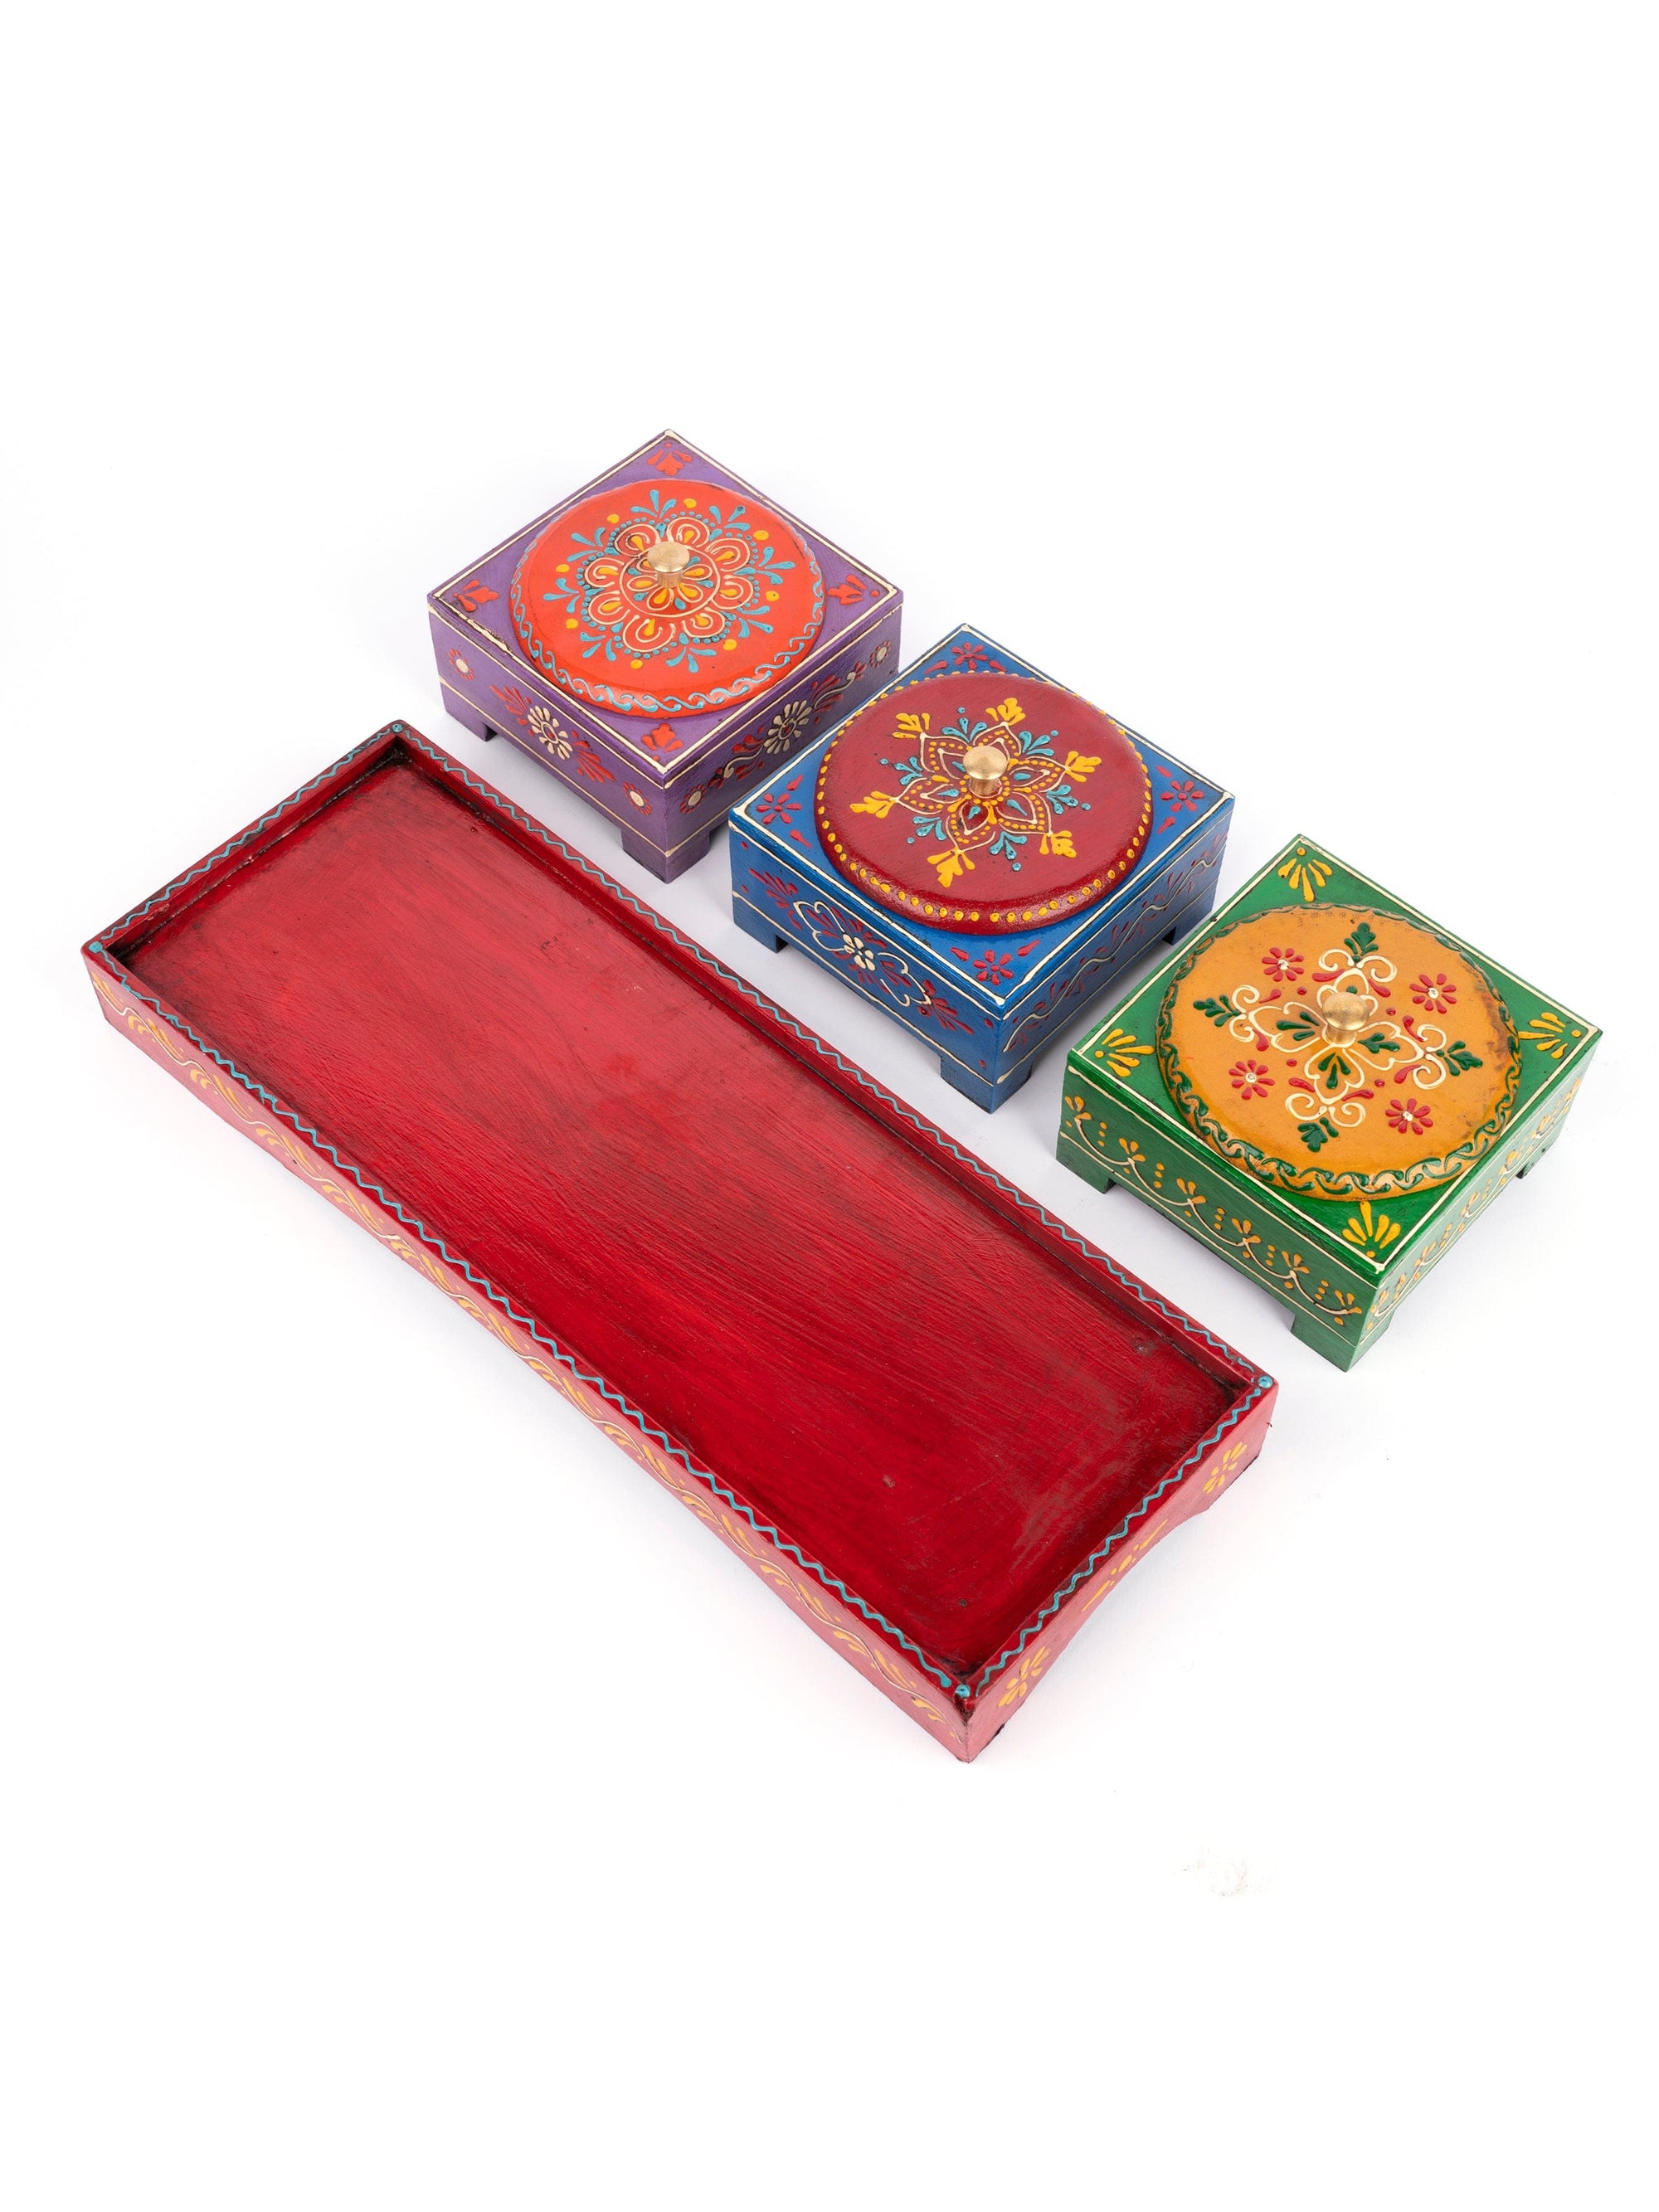 Meenakari Design Dry Fruit Storage Box Set of 3 for Festive Delights - The Heritage Artifacts